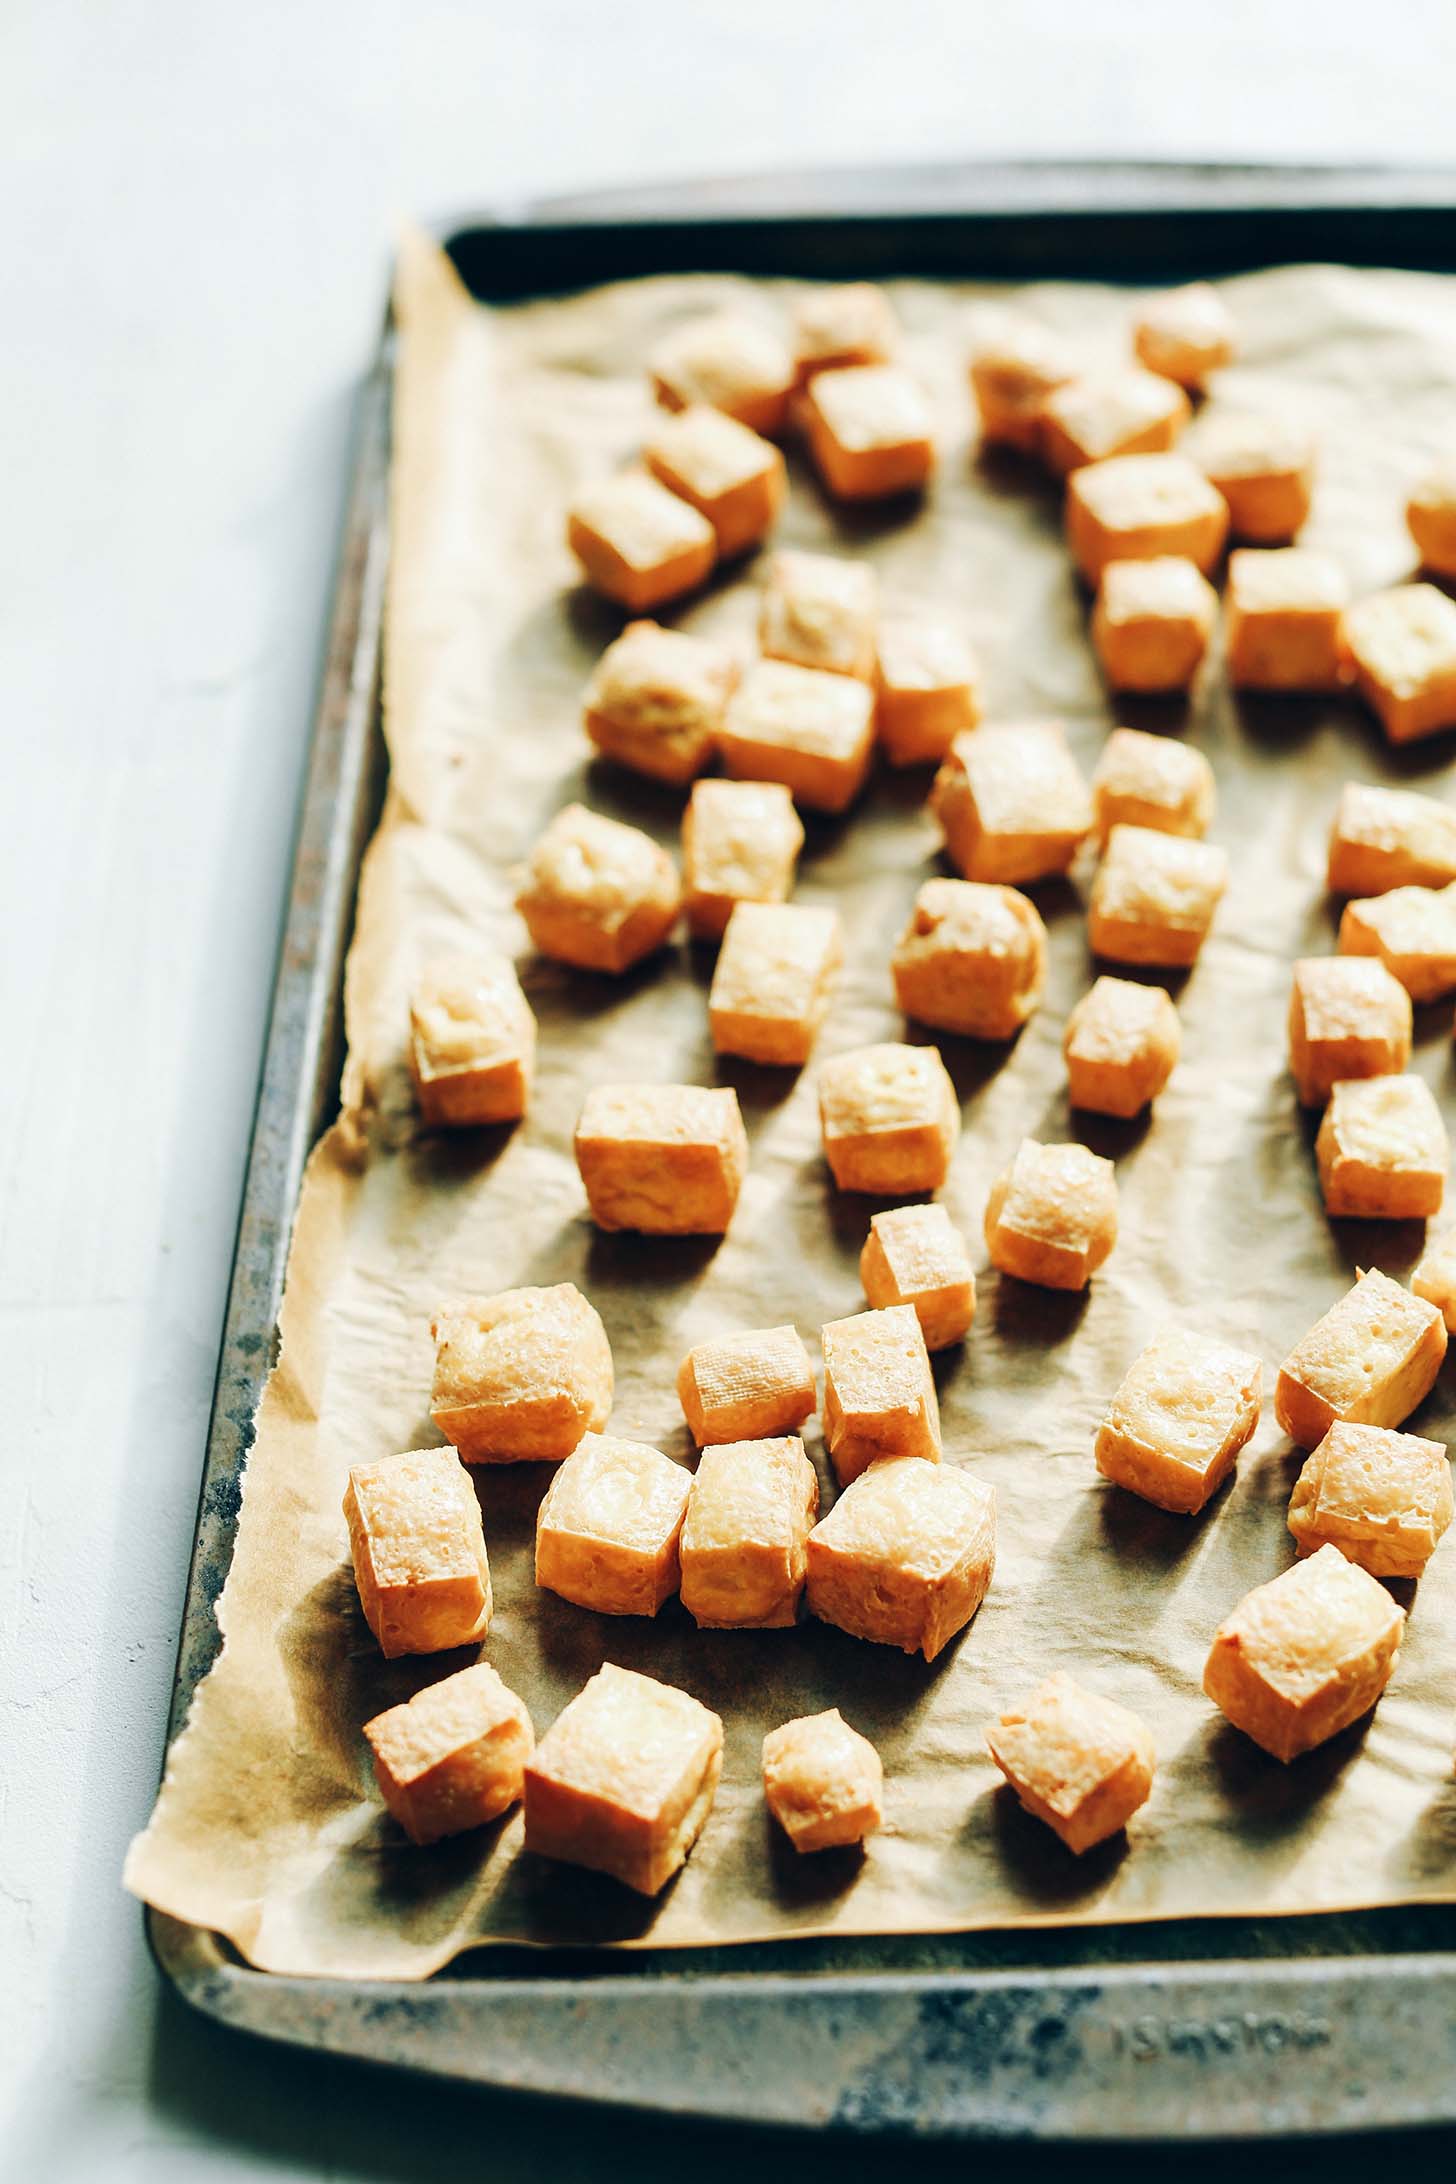 Parchment-lined baking sheet with cubed tofu for making gluten-free vegan Almond Butter Tofu Stir Fry